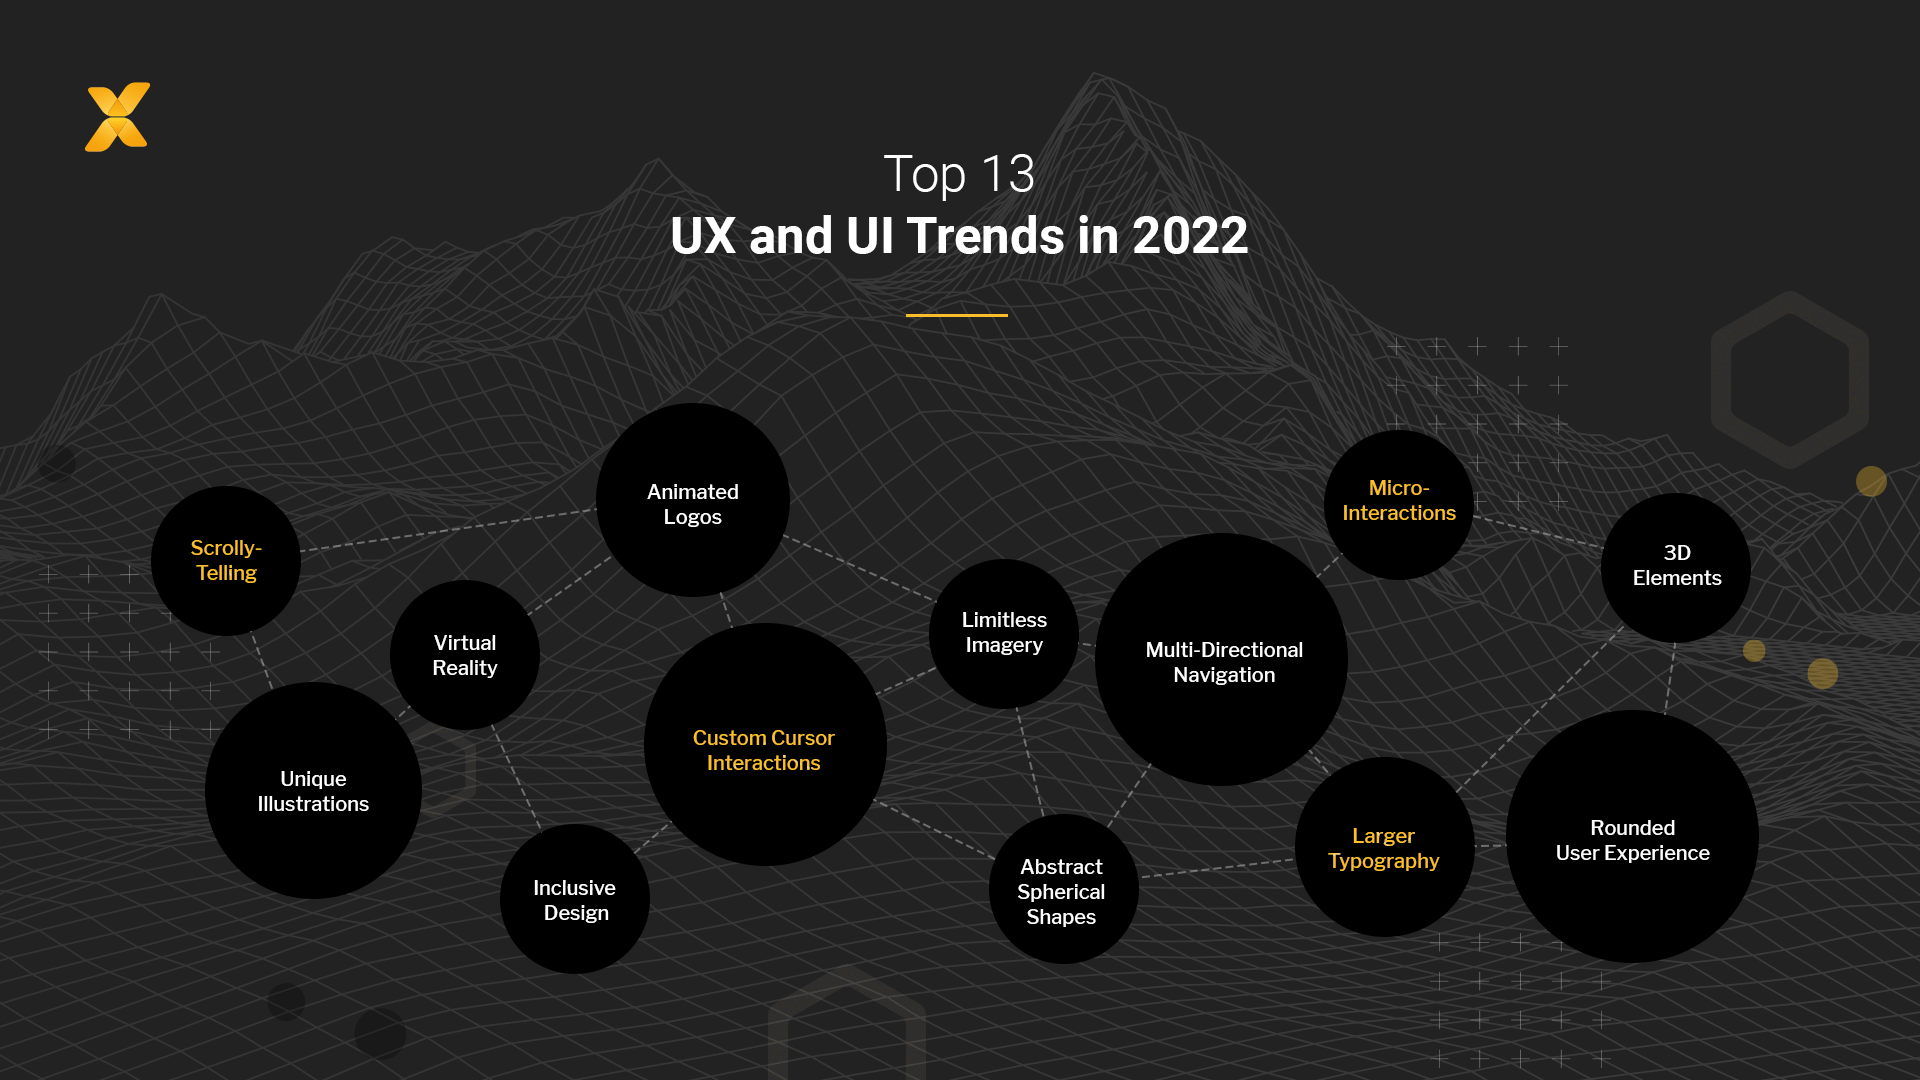 Top UX and UI Trends